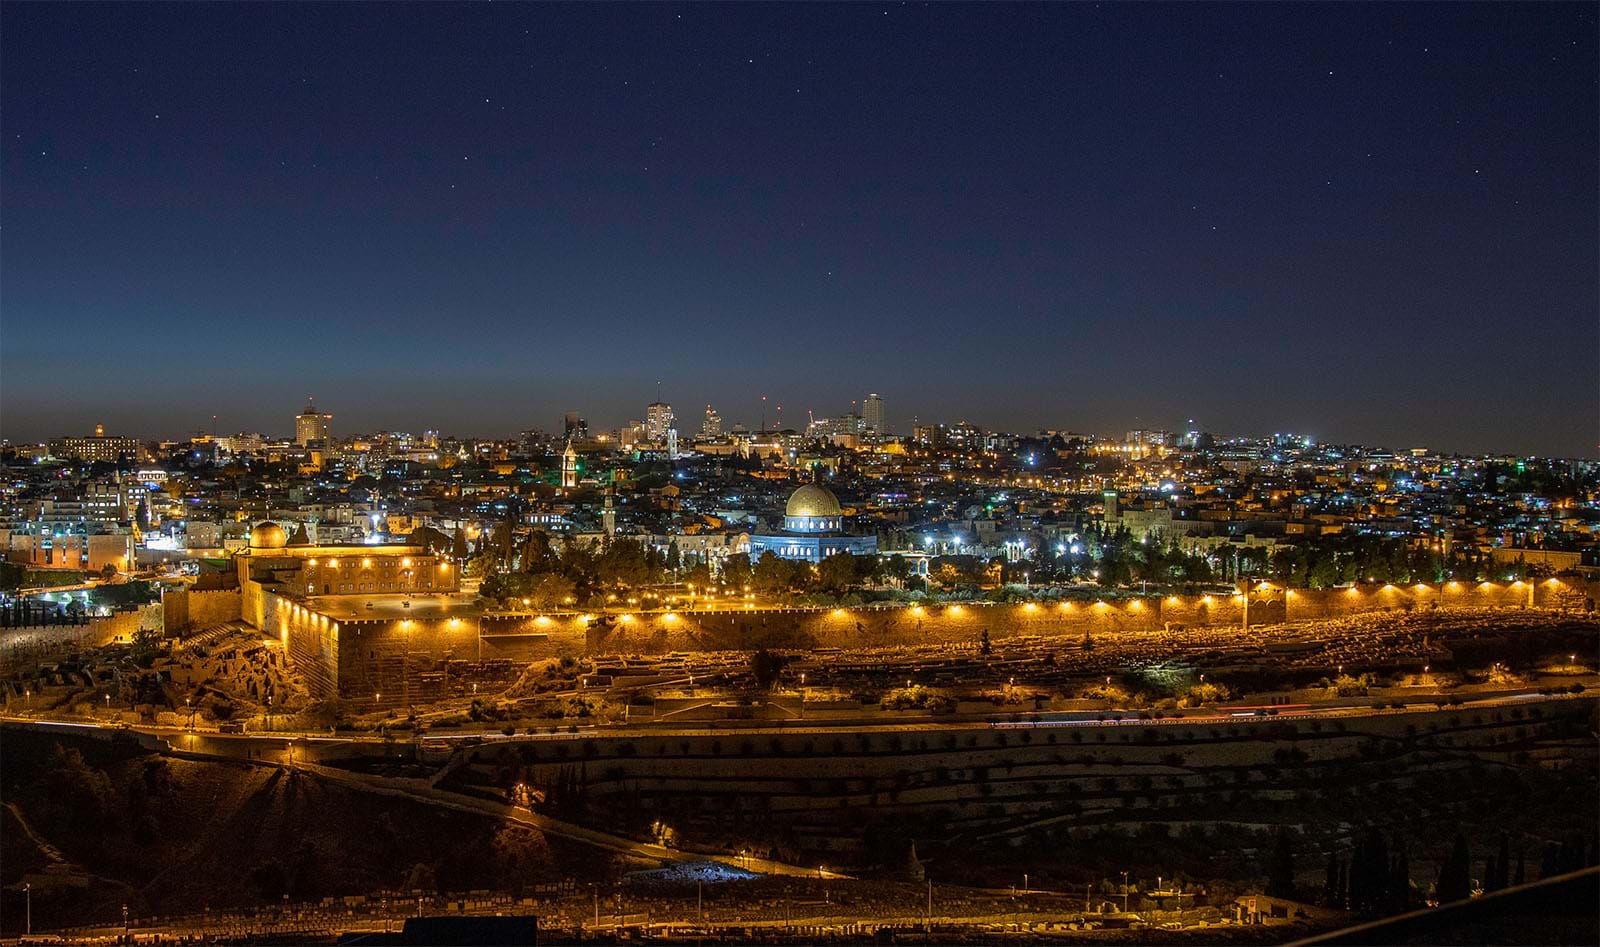 Lit up city in Israel at night